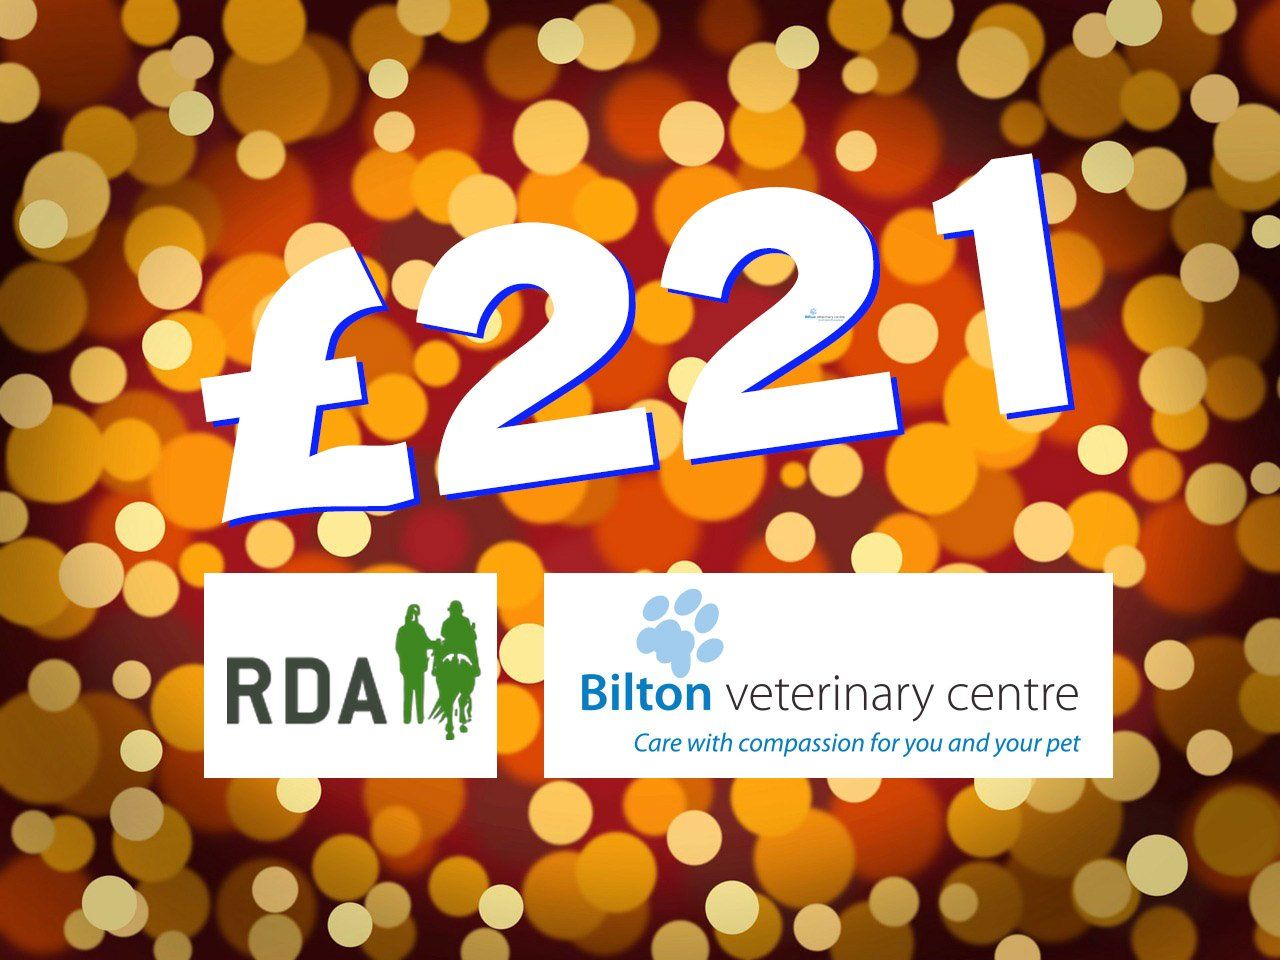 £221 pounds has been raised for the RDA.